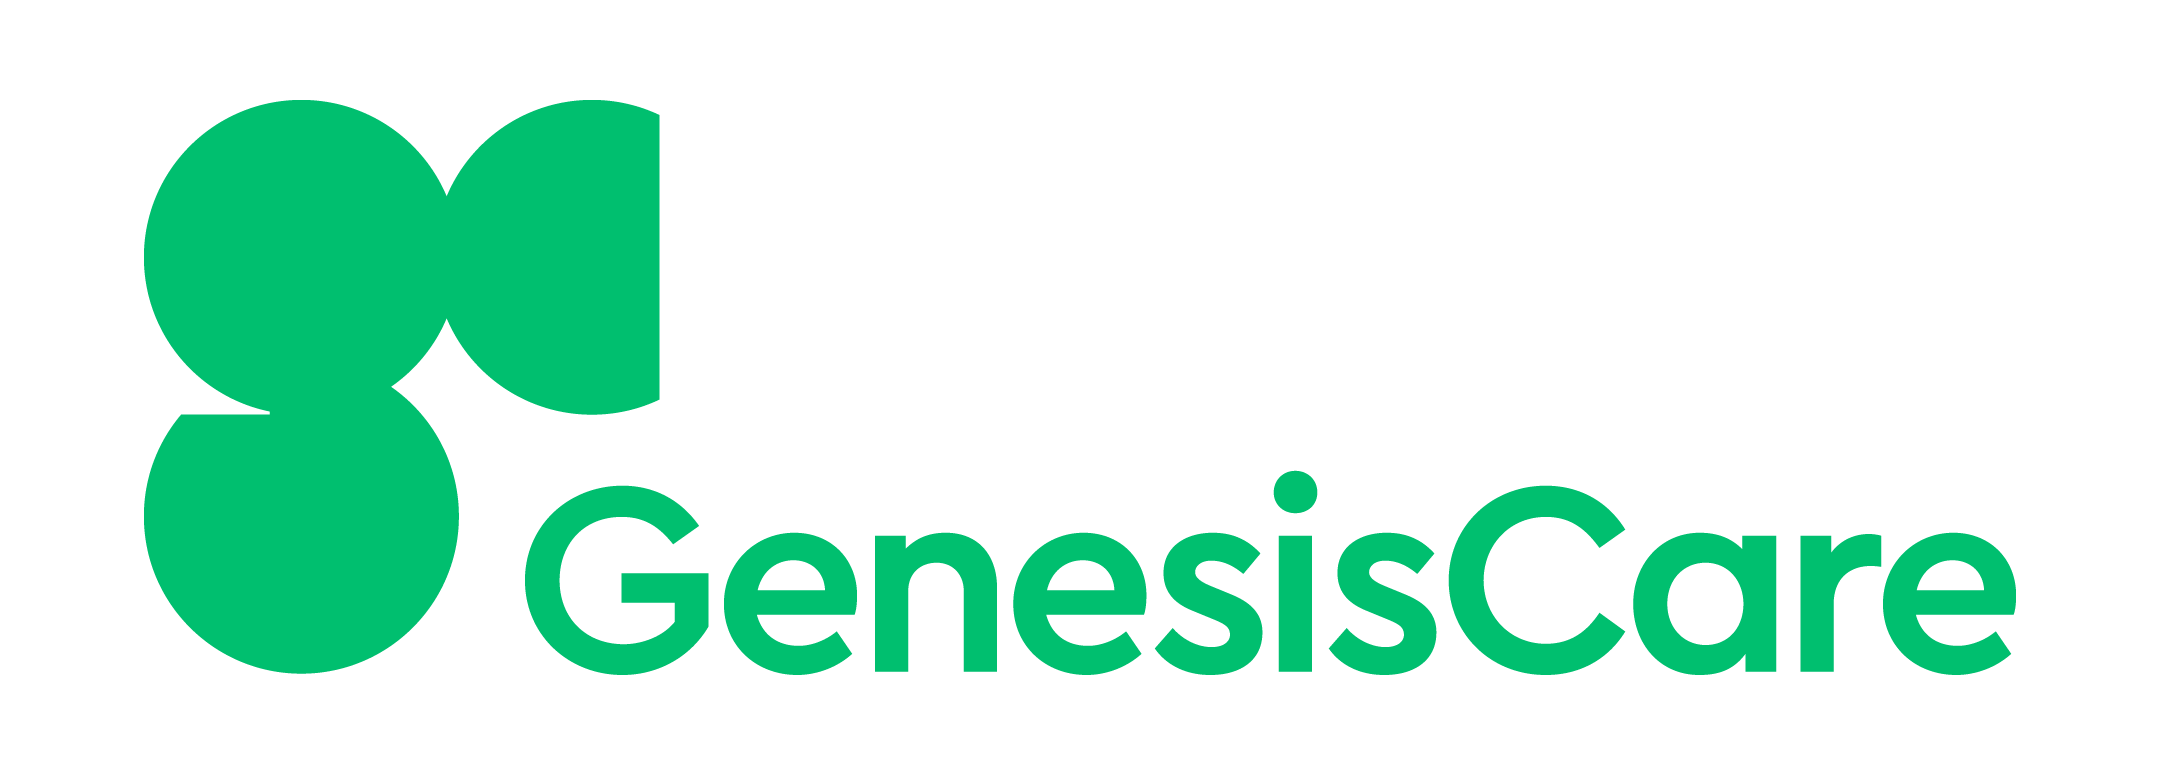 GenesisCare and Lee Health Collaborate to Increase Cancer Survival Rates with Launch of Pancreatic Cancer Center of Excellence